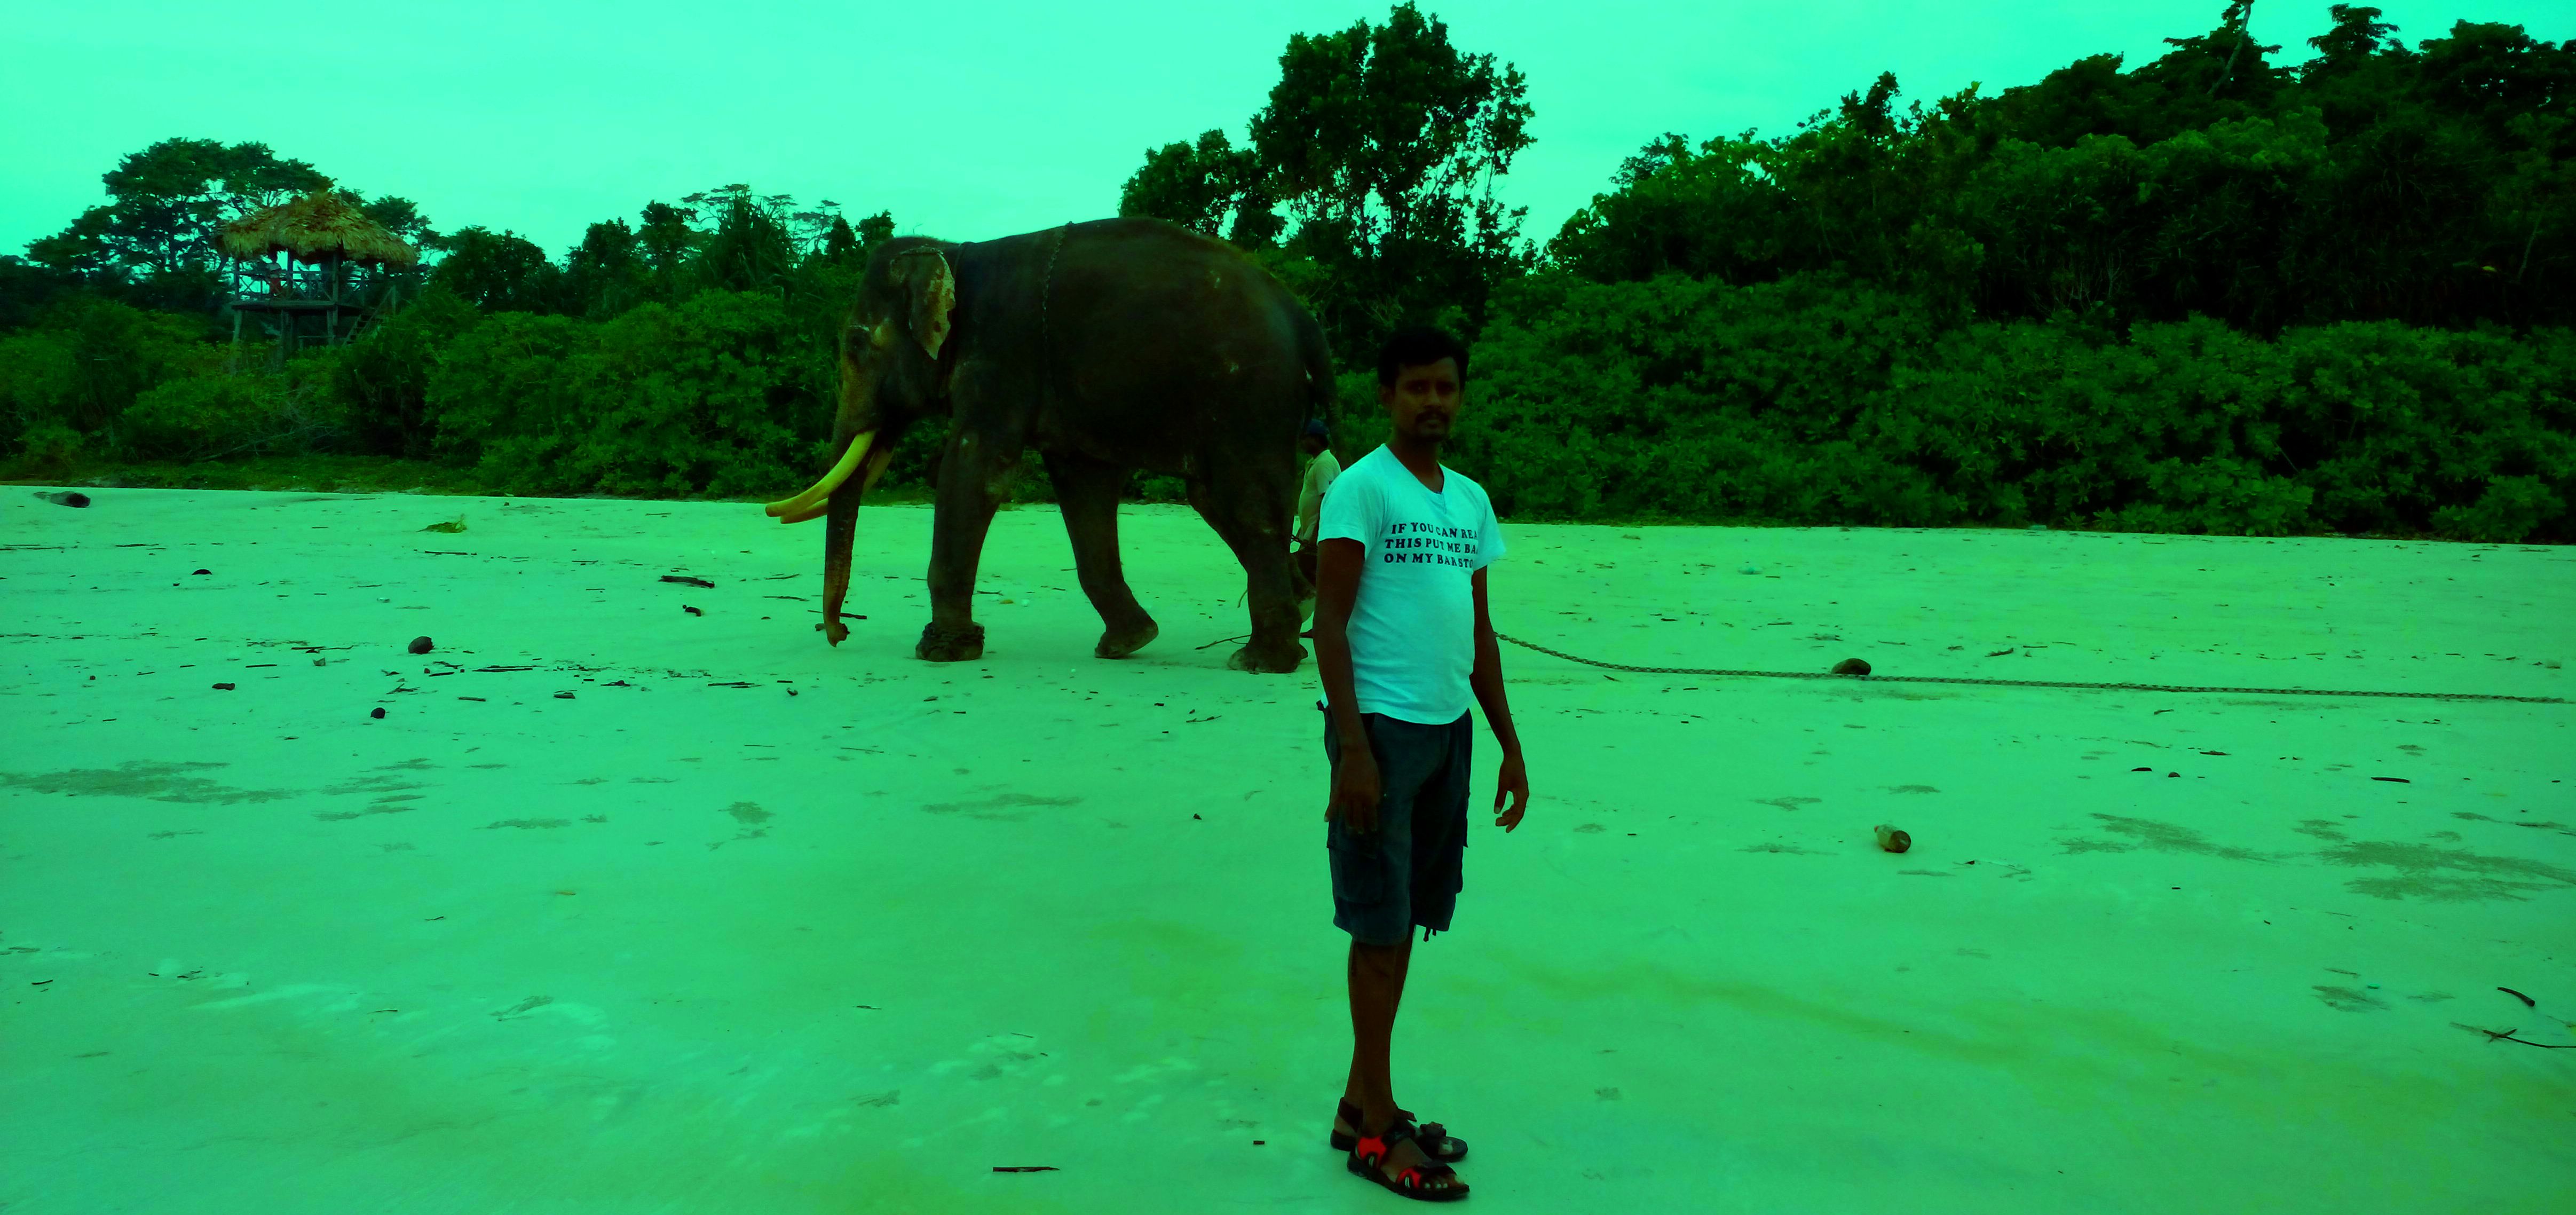 About Havelock Island